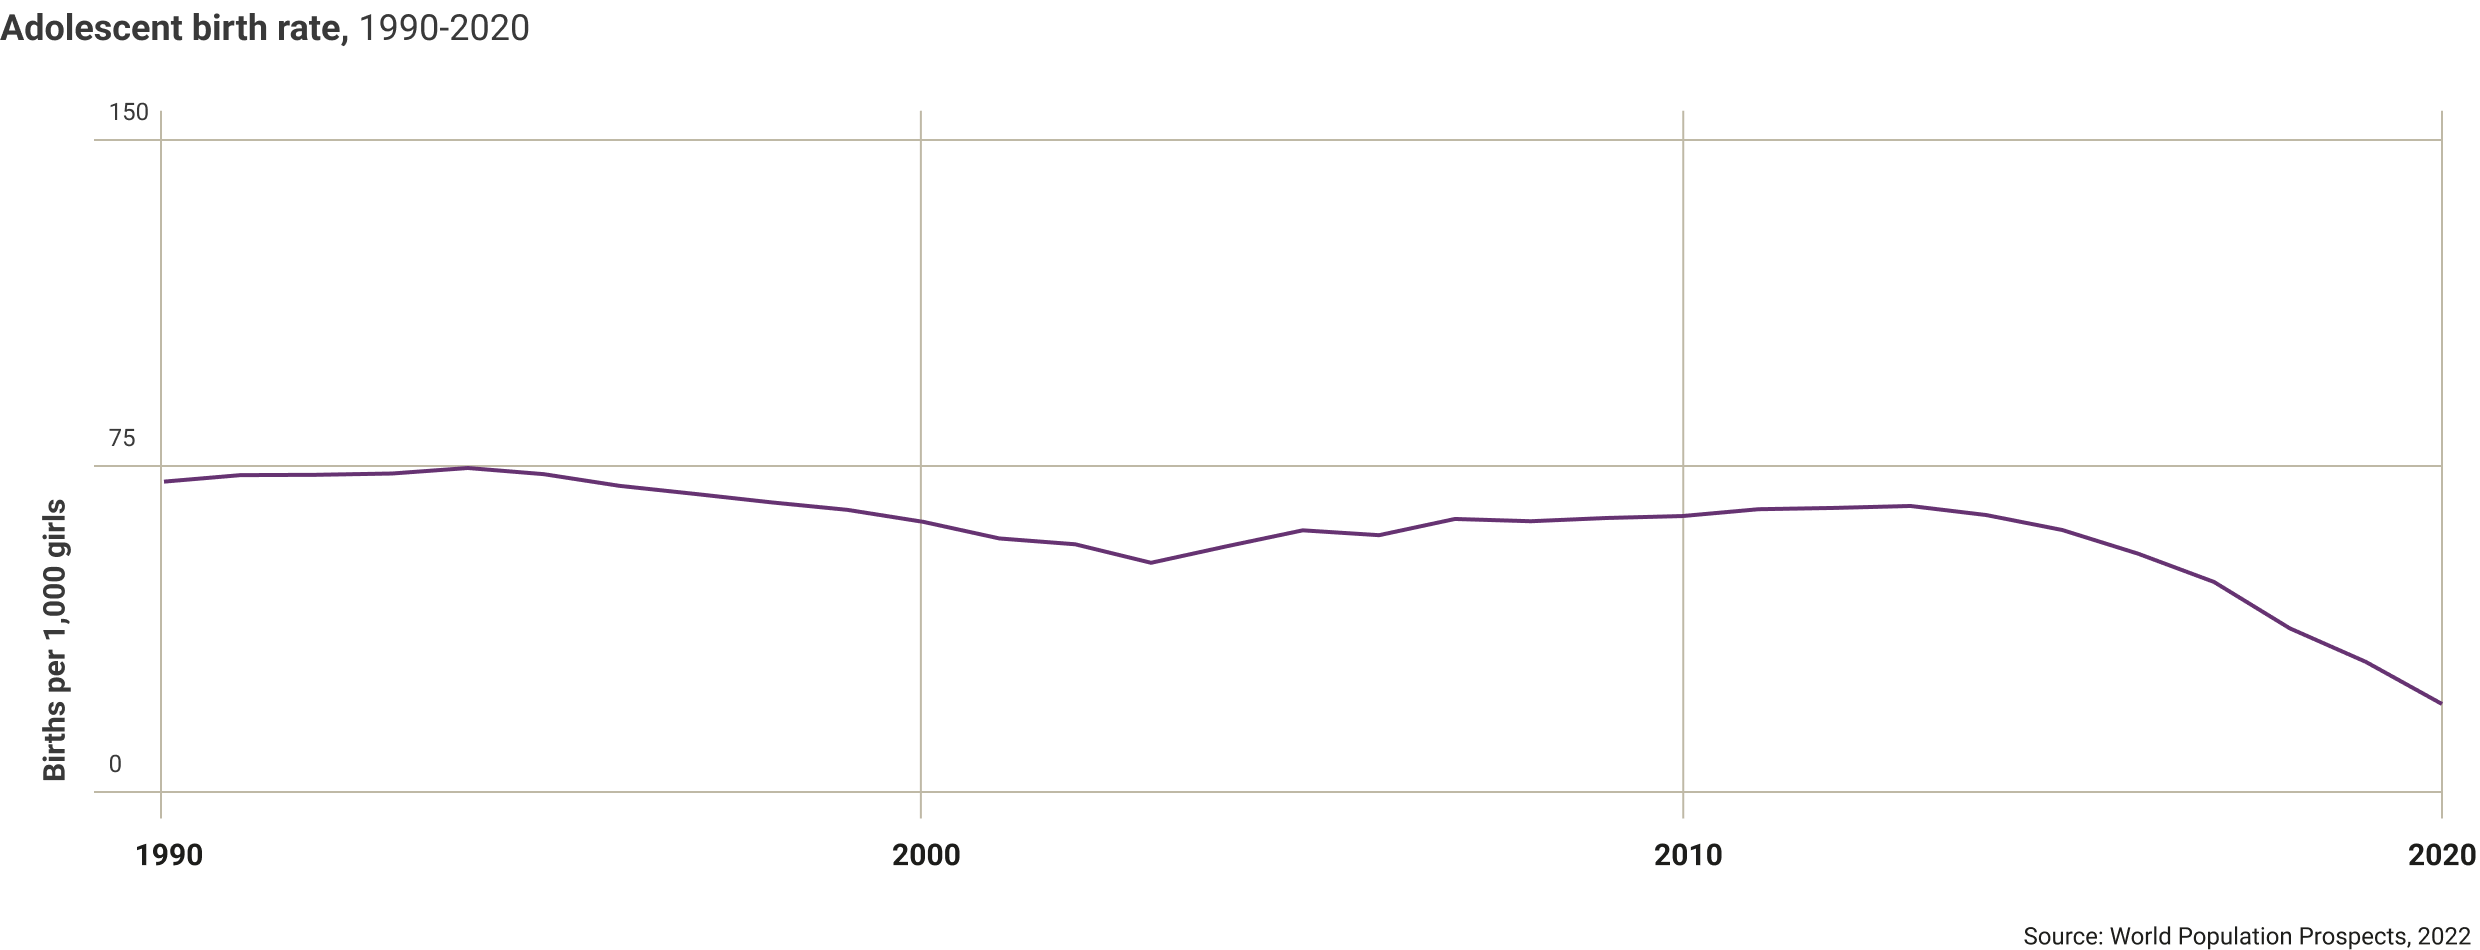 argentina-adolescence-birth-rate-1990-2020.png